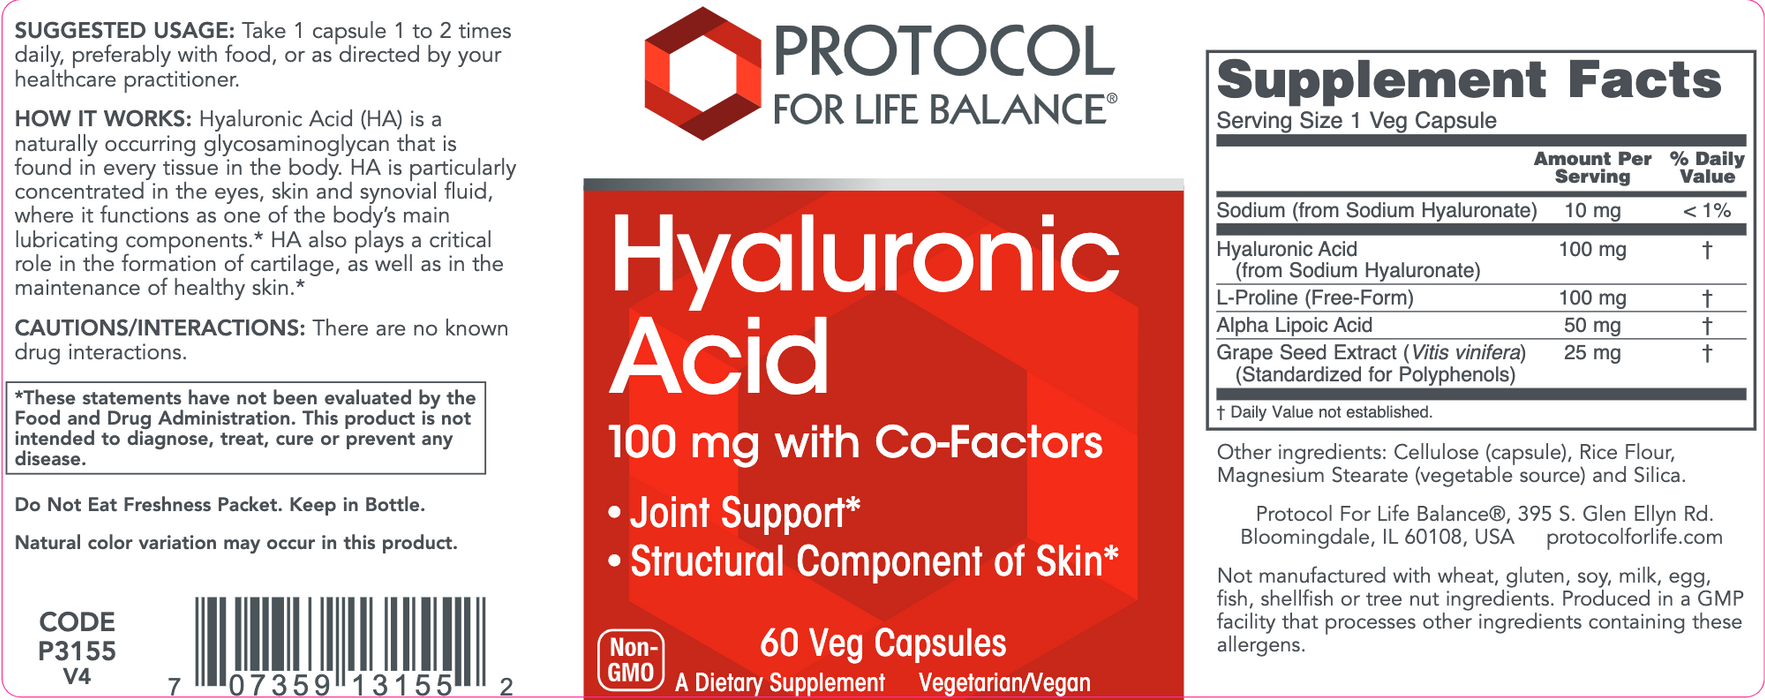 Hyaluronic Acid (60 Capsules)-Vitamins & Supplements-Protocol For Life Balance-Pine Street Clinic